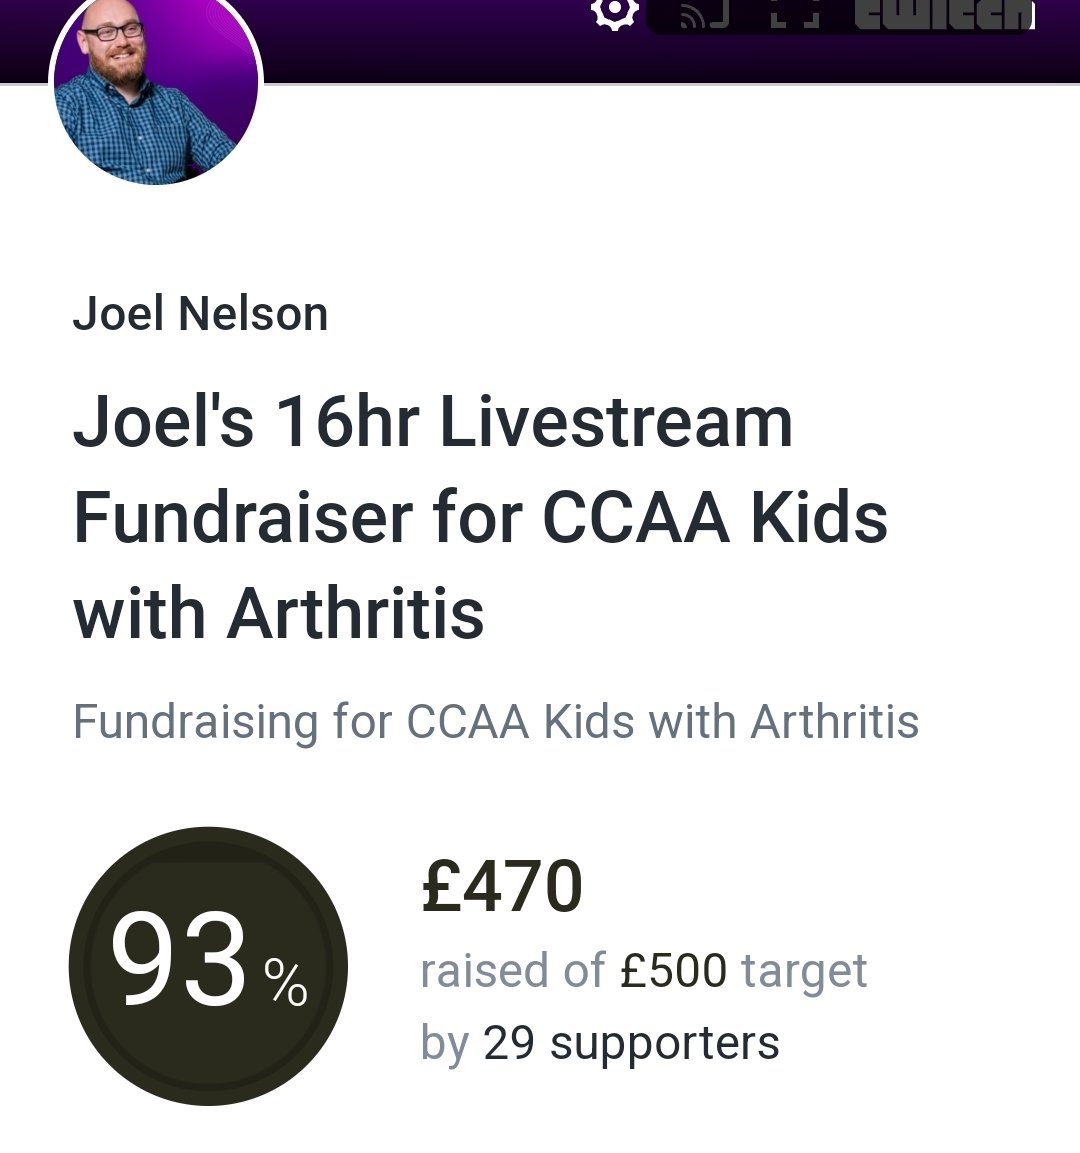 - 8 hrs 55mins streamed nonstop today - 22hrs 18min this week in total - 17,373 minutes watched - 667 live viewers - 4,458 chat messages And £470 raised for @CCAA_org!! 🤯😍💛🖤 Tomorrow, I drive to Birmingham ahead of @NaidexShow to carry on the advocacy mission. 😴😅😊